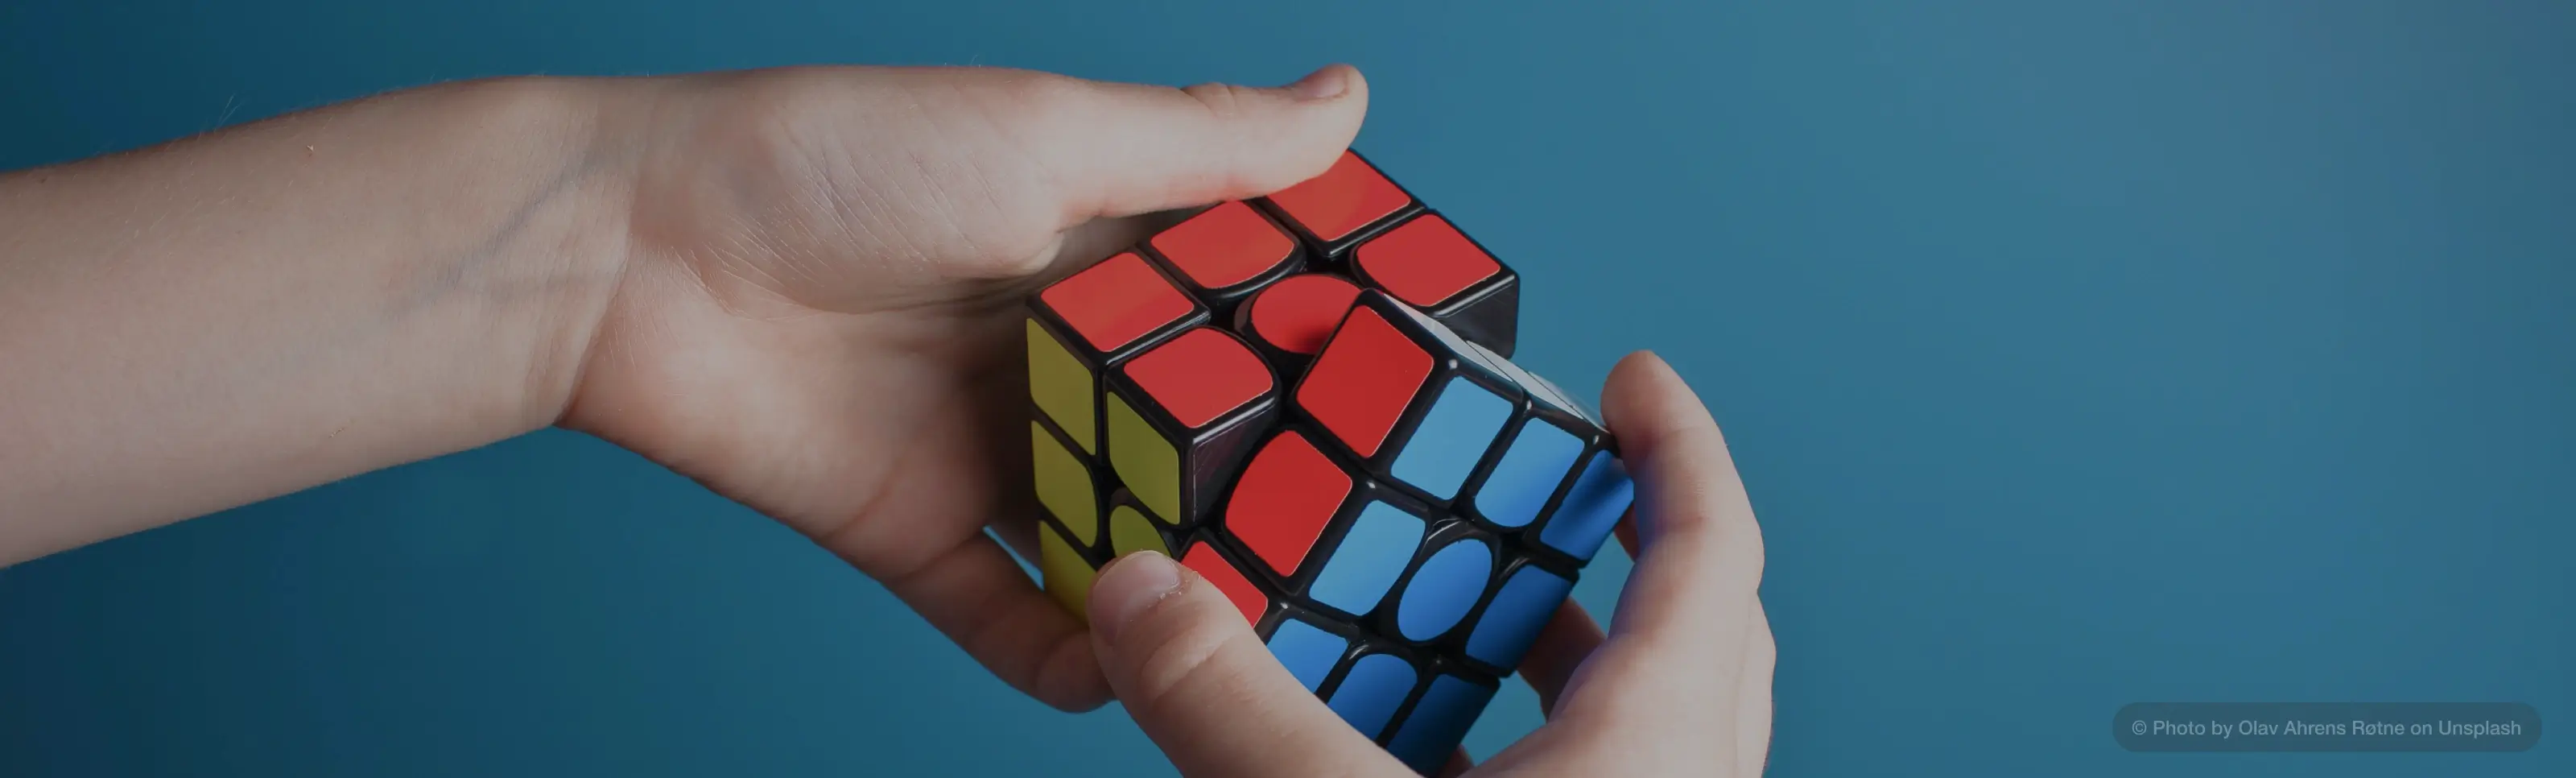 Rubik's Cube Overview